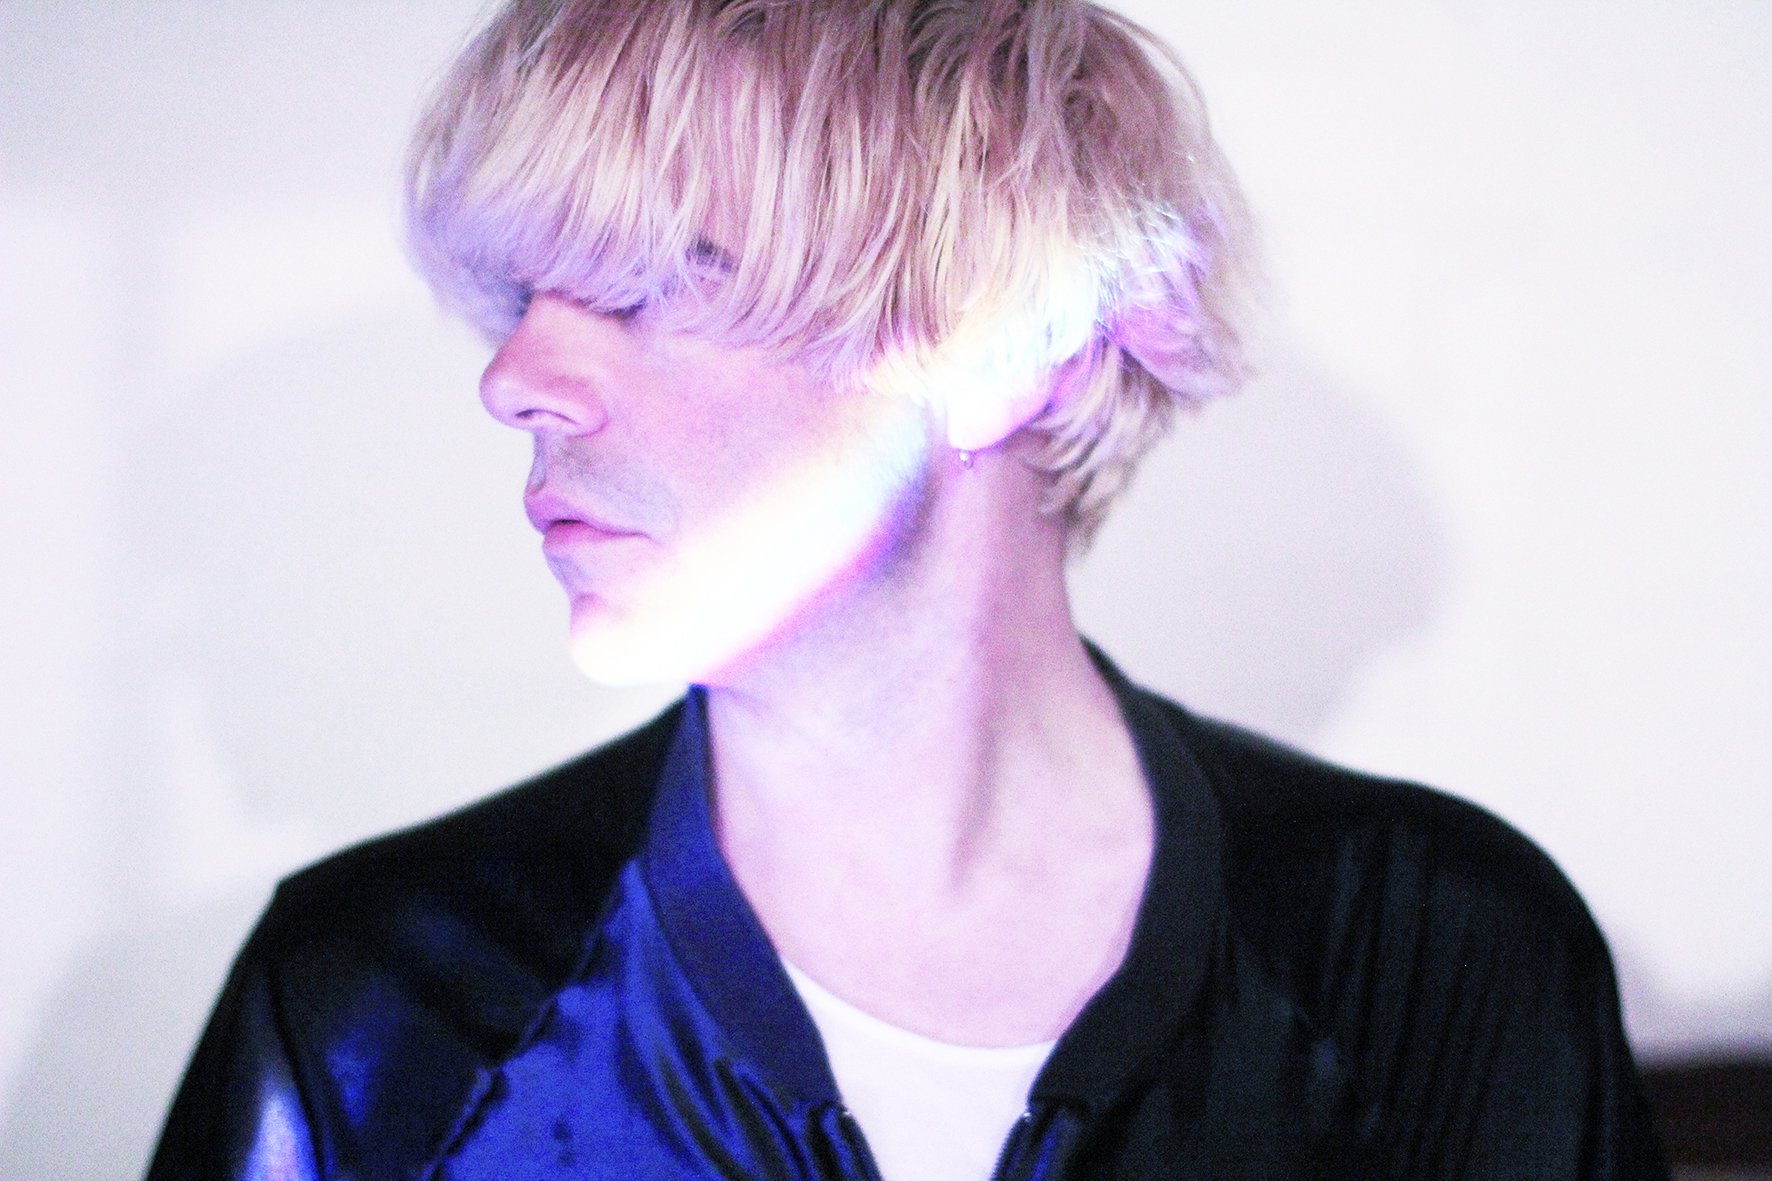 INTERVIEW: New Music, Writing Books, Revels & Going to the Gym – A sit-down with TIM BURGESS 